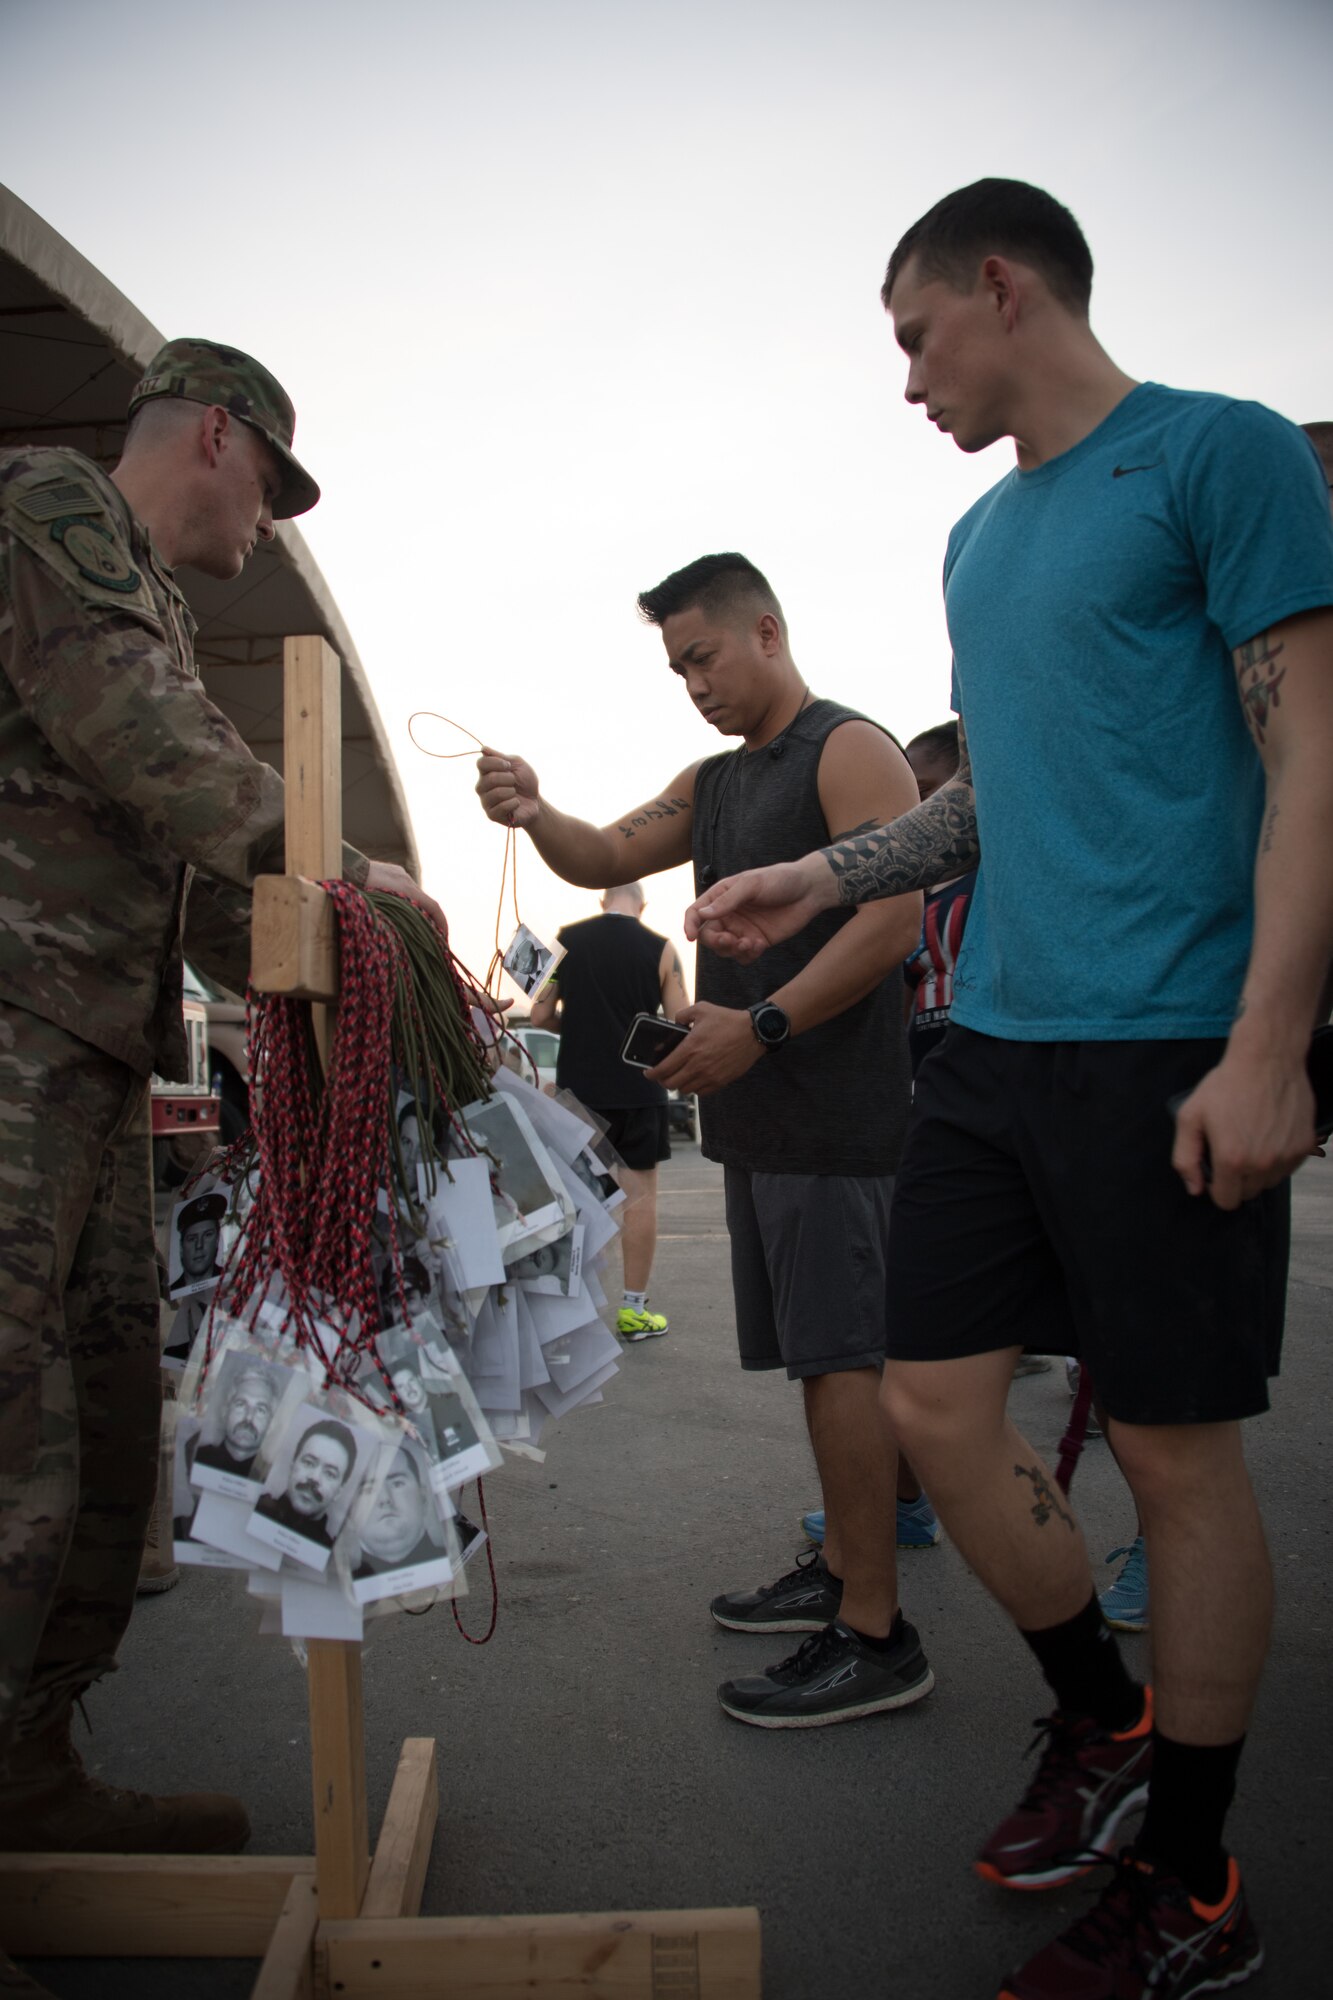 U.S. Airmen from the 380th Air Expeditionary Wing are given lanyards to wear around their neck with the photos of fallen first responders while participating in a memorial 5k run honoring the men and women who gave their lives on 9/11, Al Dhafra Air Base, United Arab Emirates, Sept. 11, 2018. (U.S. Air Force photo by Tech. Sgt. Nieko Carzis)